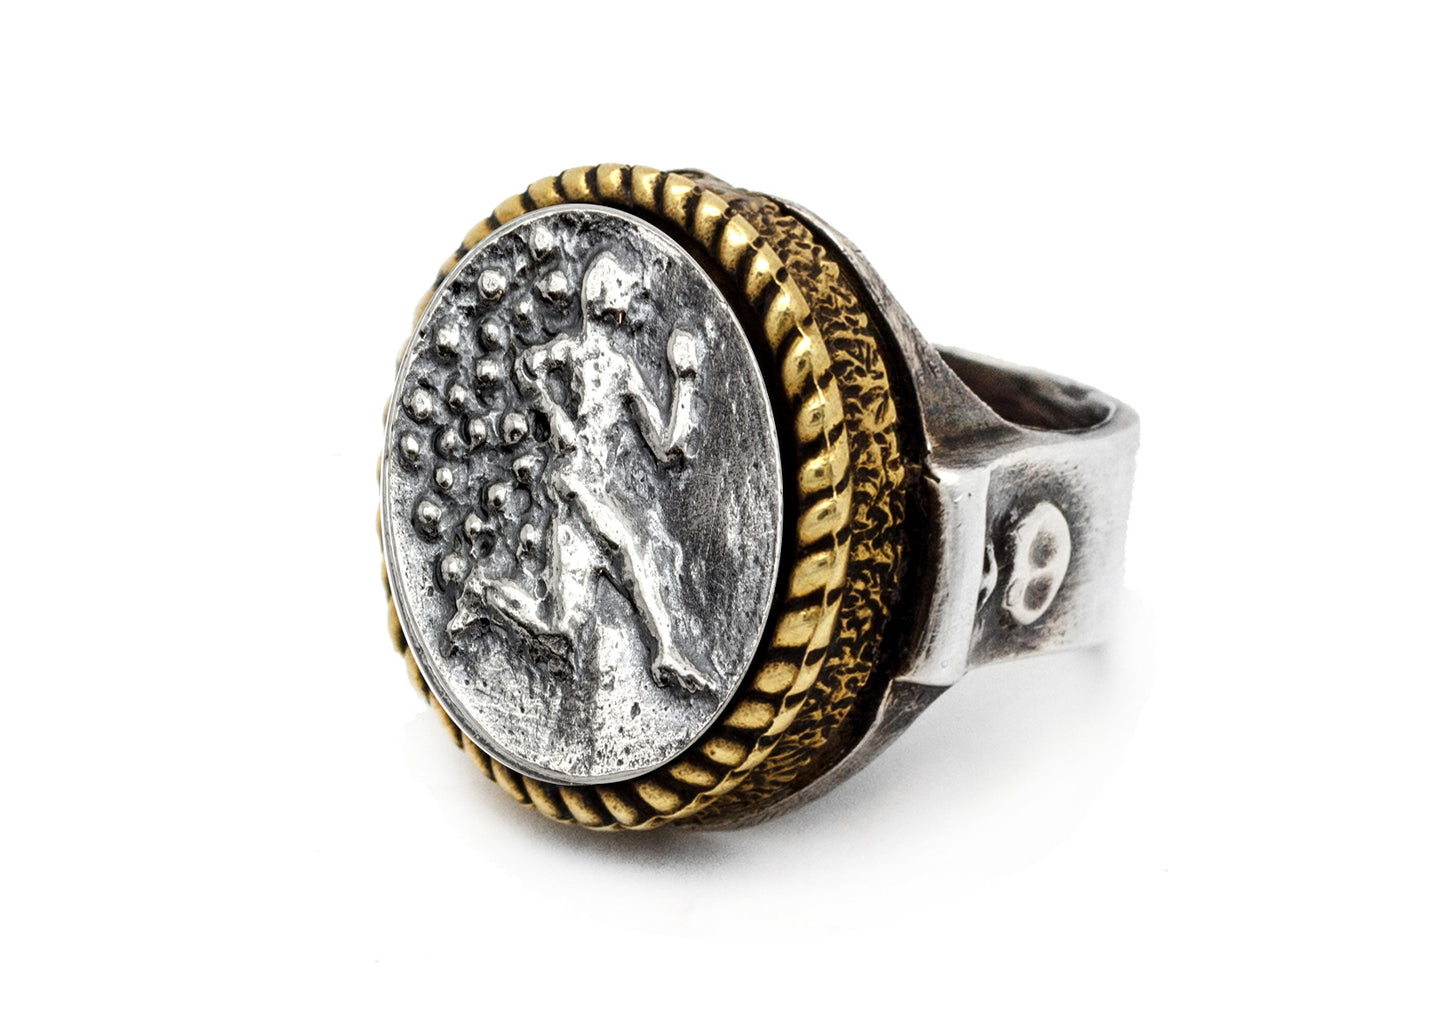 Coin ring with the Running Man coin medallion